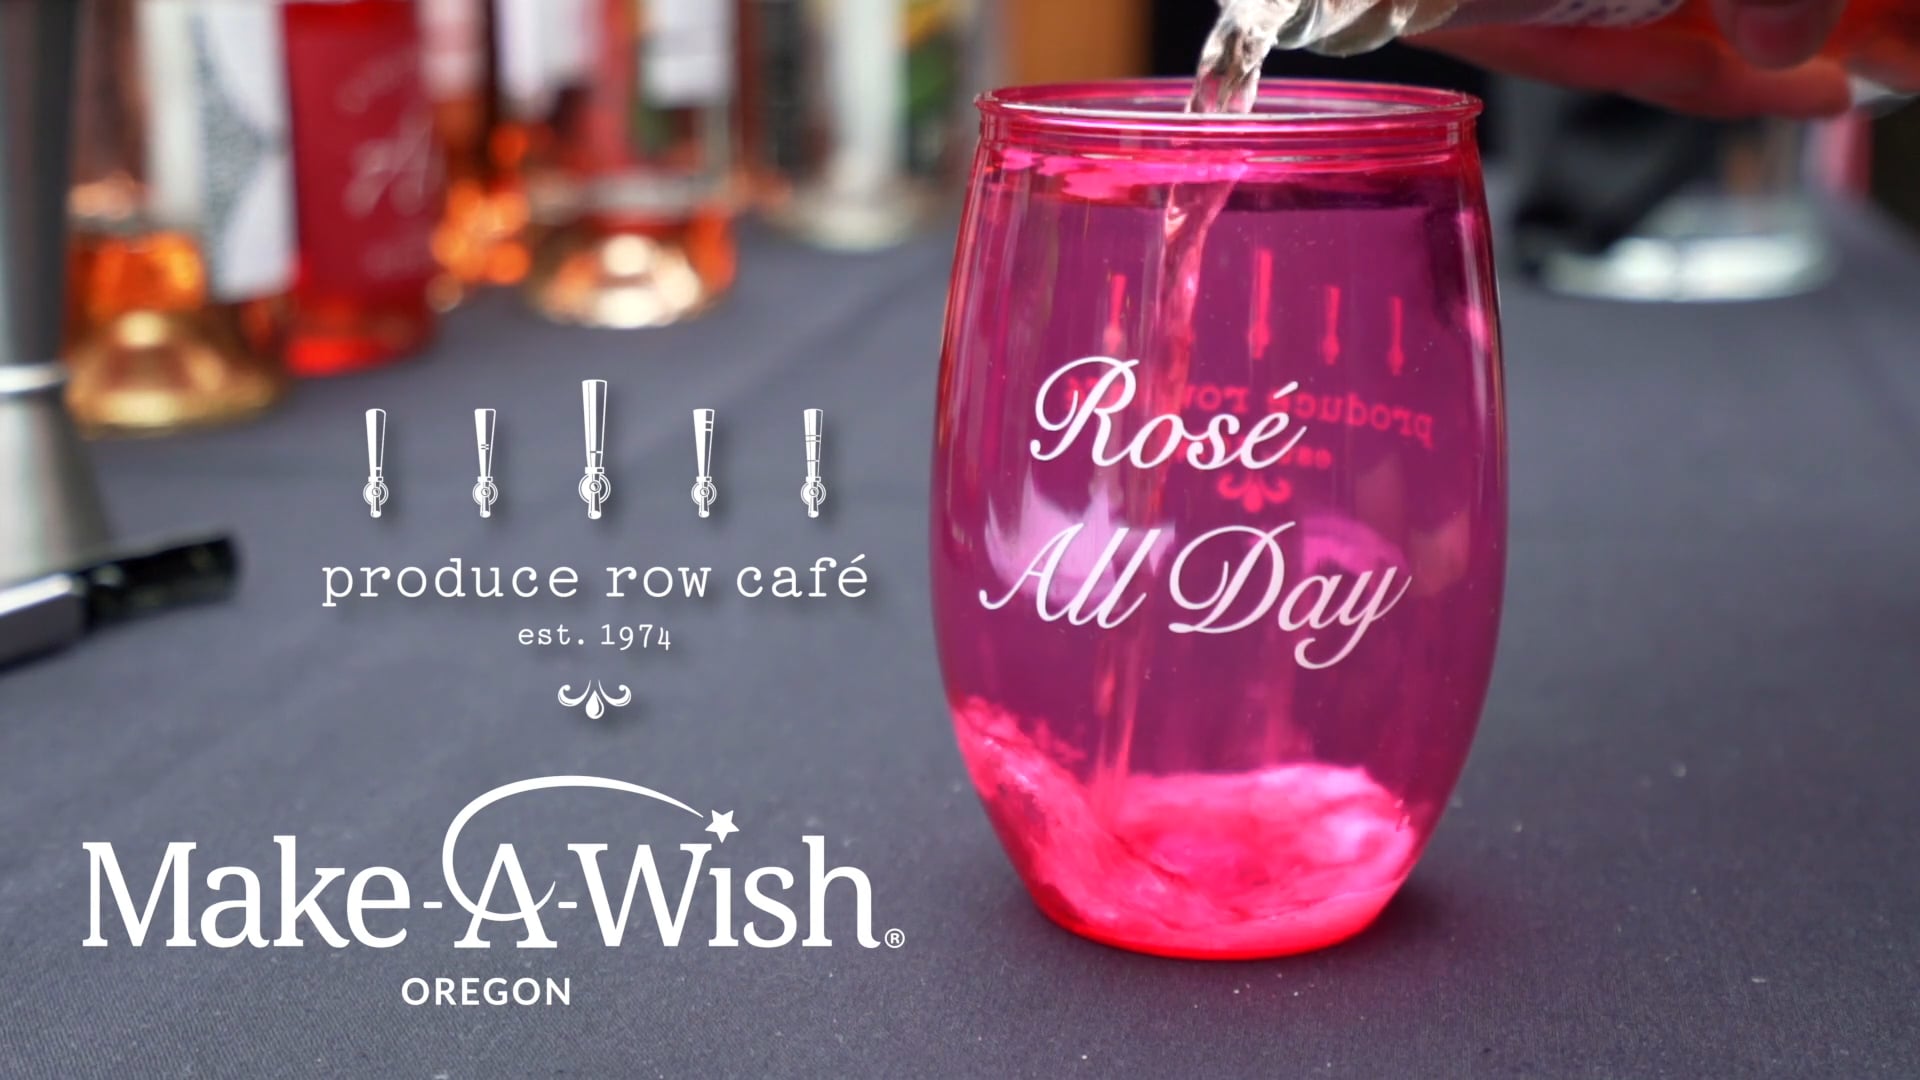 Make-A-Wish Oregon - Rose All DayParty @ Produce Row - Song Olde Salooner